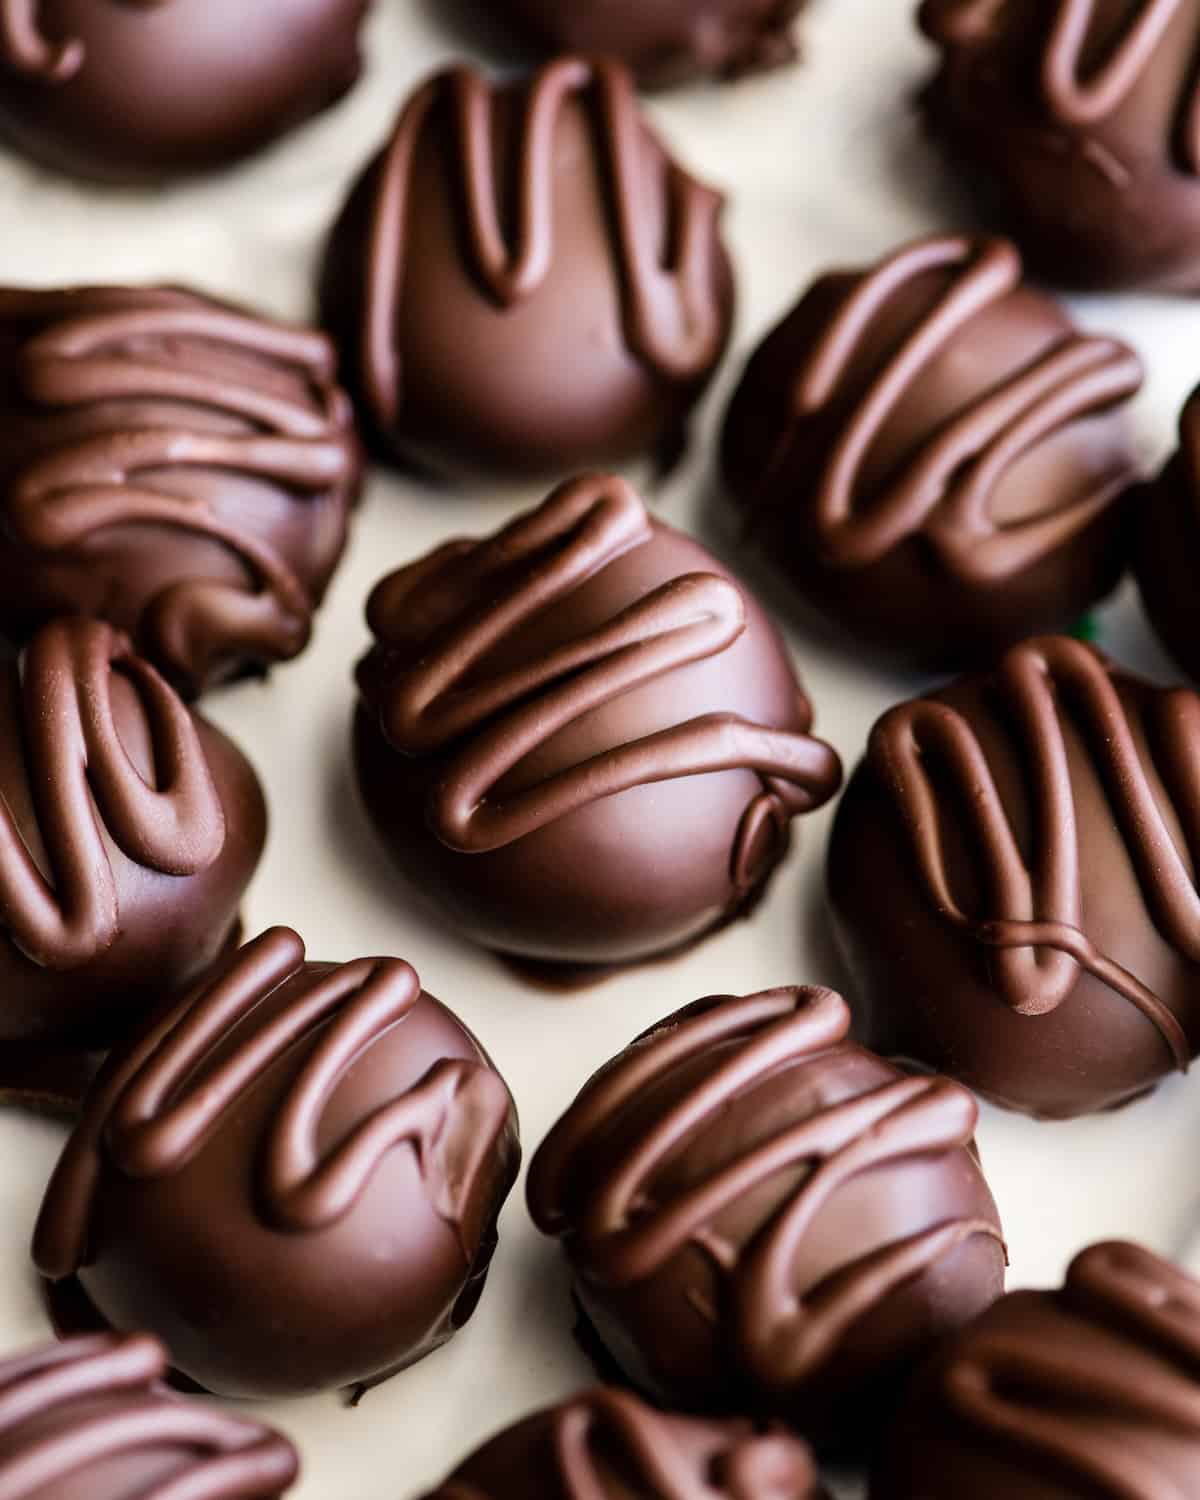 10 No-Bake Chocolate Peanut Butter Balls with a chocolate drizzle